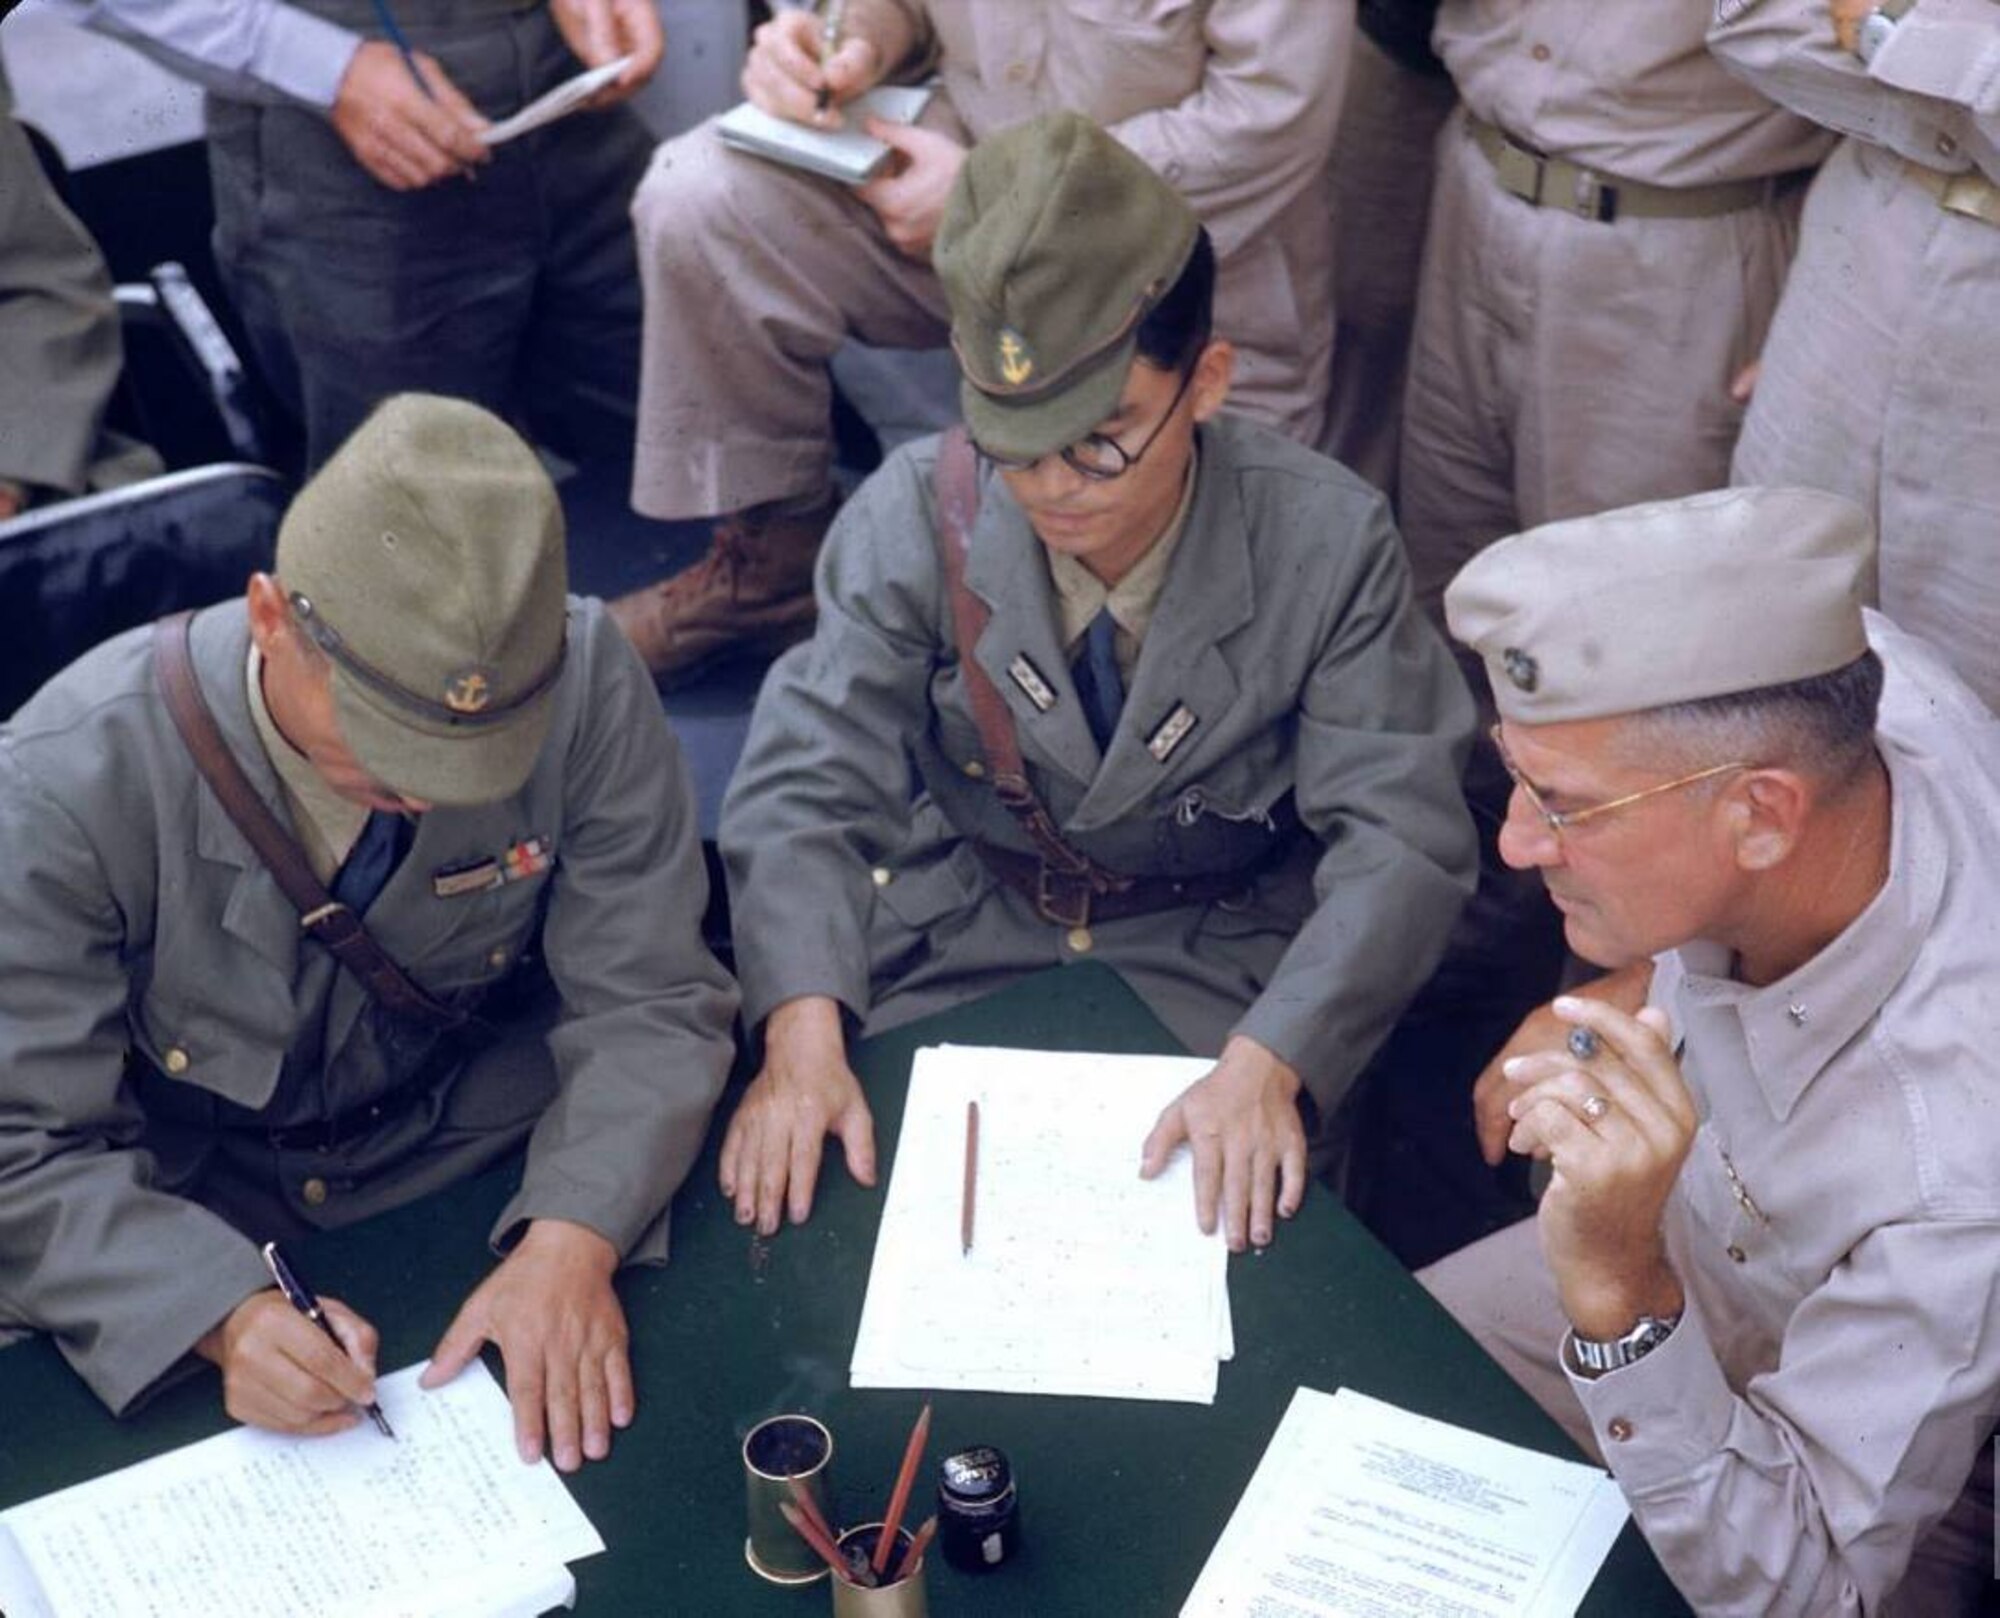 Aboard the USS Levy (DE-162), Japanese Rear Admiral Shigematsu Sakaibar (left) signs a document surrendering control of Wake Island to Marine Brig. General Lawson H. M. Sanderson (right) and U.S. forces, September 4, 1945. Sanderson, who is called the “father of dive-bombing” by the Marines, once crashed an experimental aircraft into Lake St. Clair during a 1922 flight from Selfridge Field. Sanderson was buried in mud in the lake bottom after the crash, but managed to dig himself out to emerge unharmed. (U.S. Navy photo)